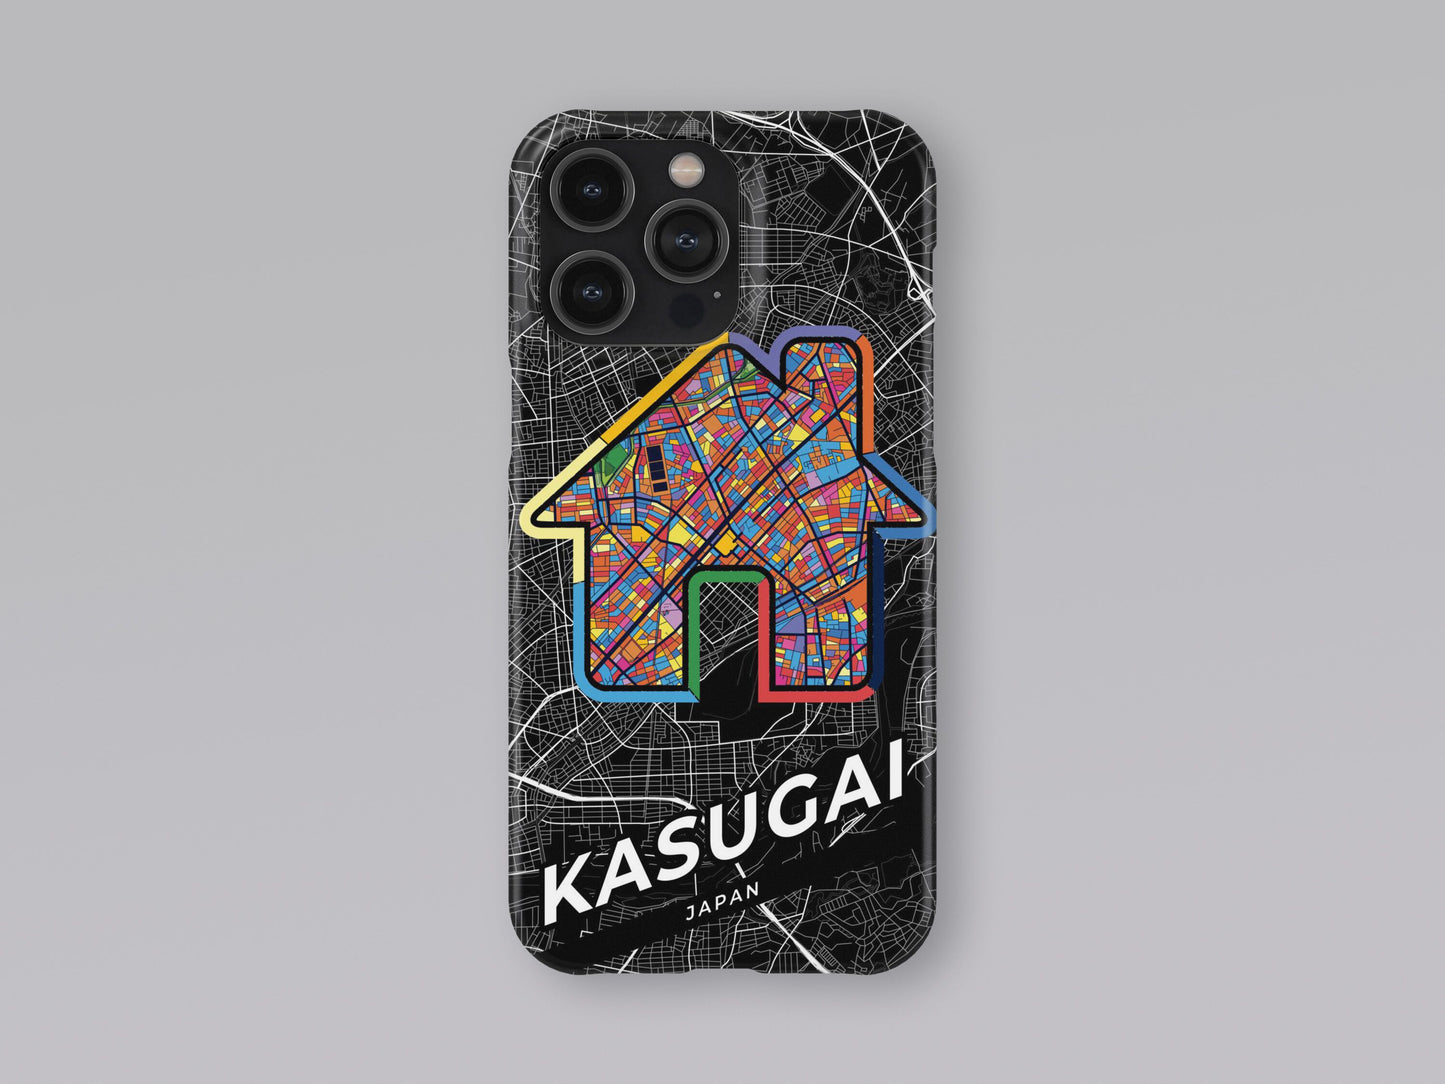 Kasugai Japan slim phone case with colorful icon. Birthday, wedding or housewarming gift. Couple match cases. 3